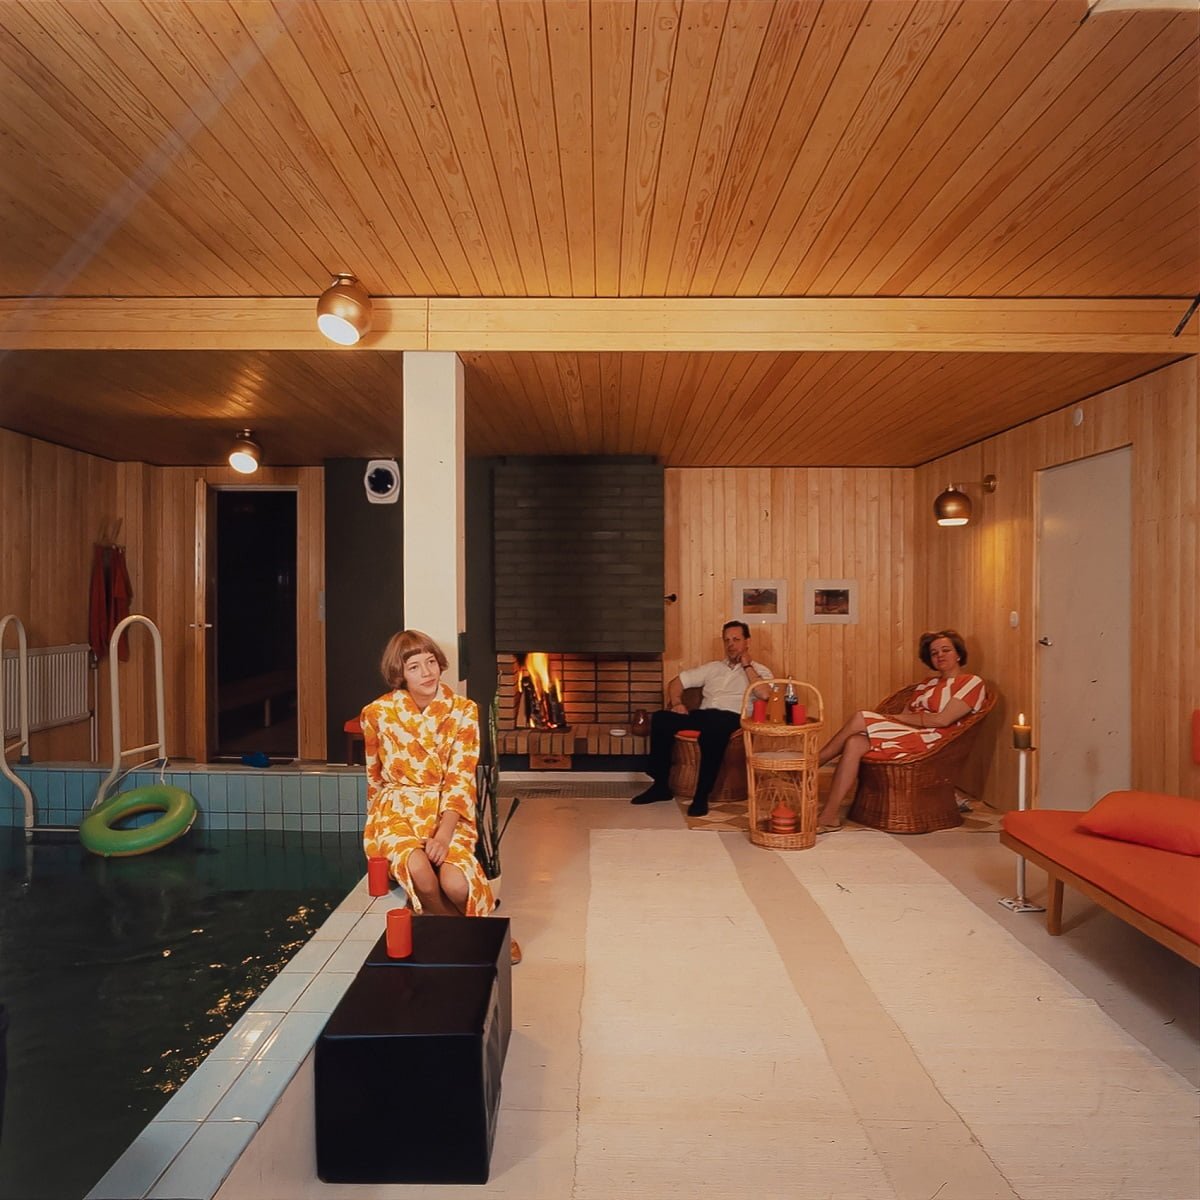 The picture shows a family enjoying their leisure time in the newly renovated, stunning pool and fireplace space. Photo from a client's family album.